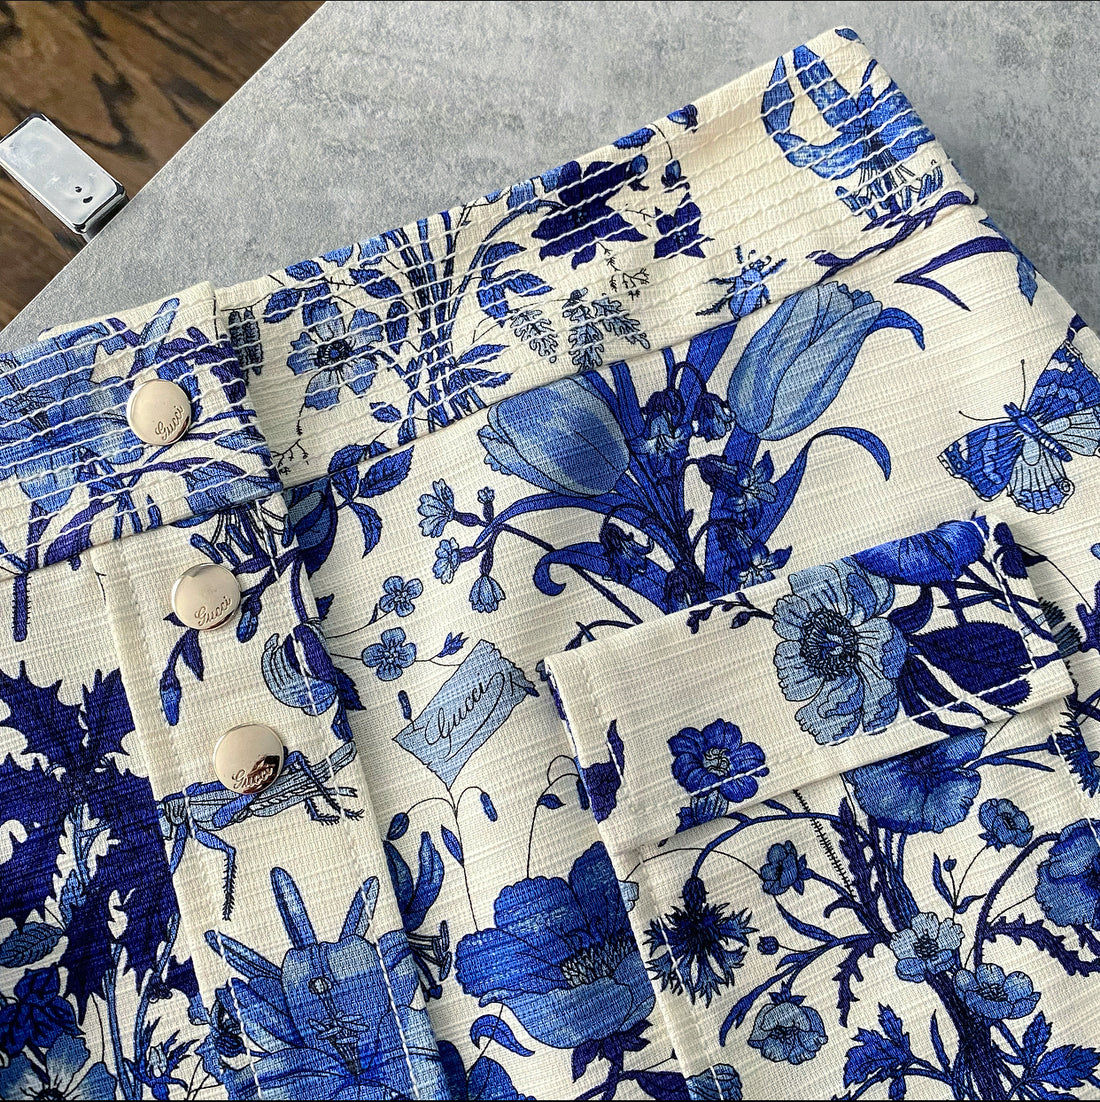 Gucci Flora Fauna Blue and Ivory Skirt - IT38 / 4